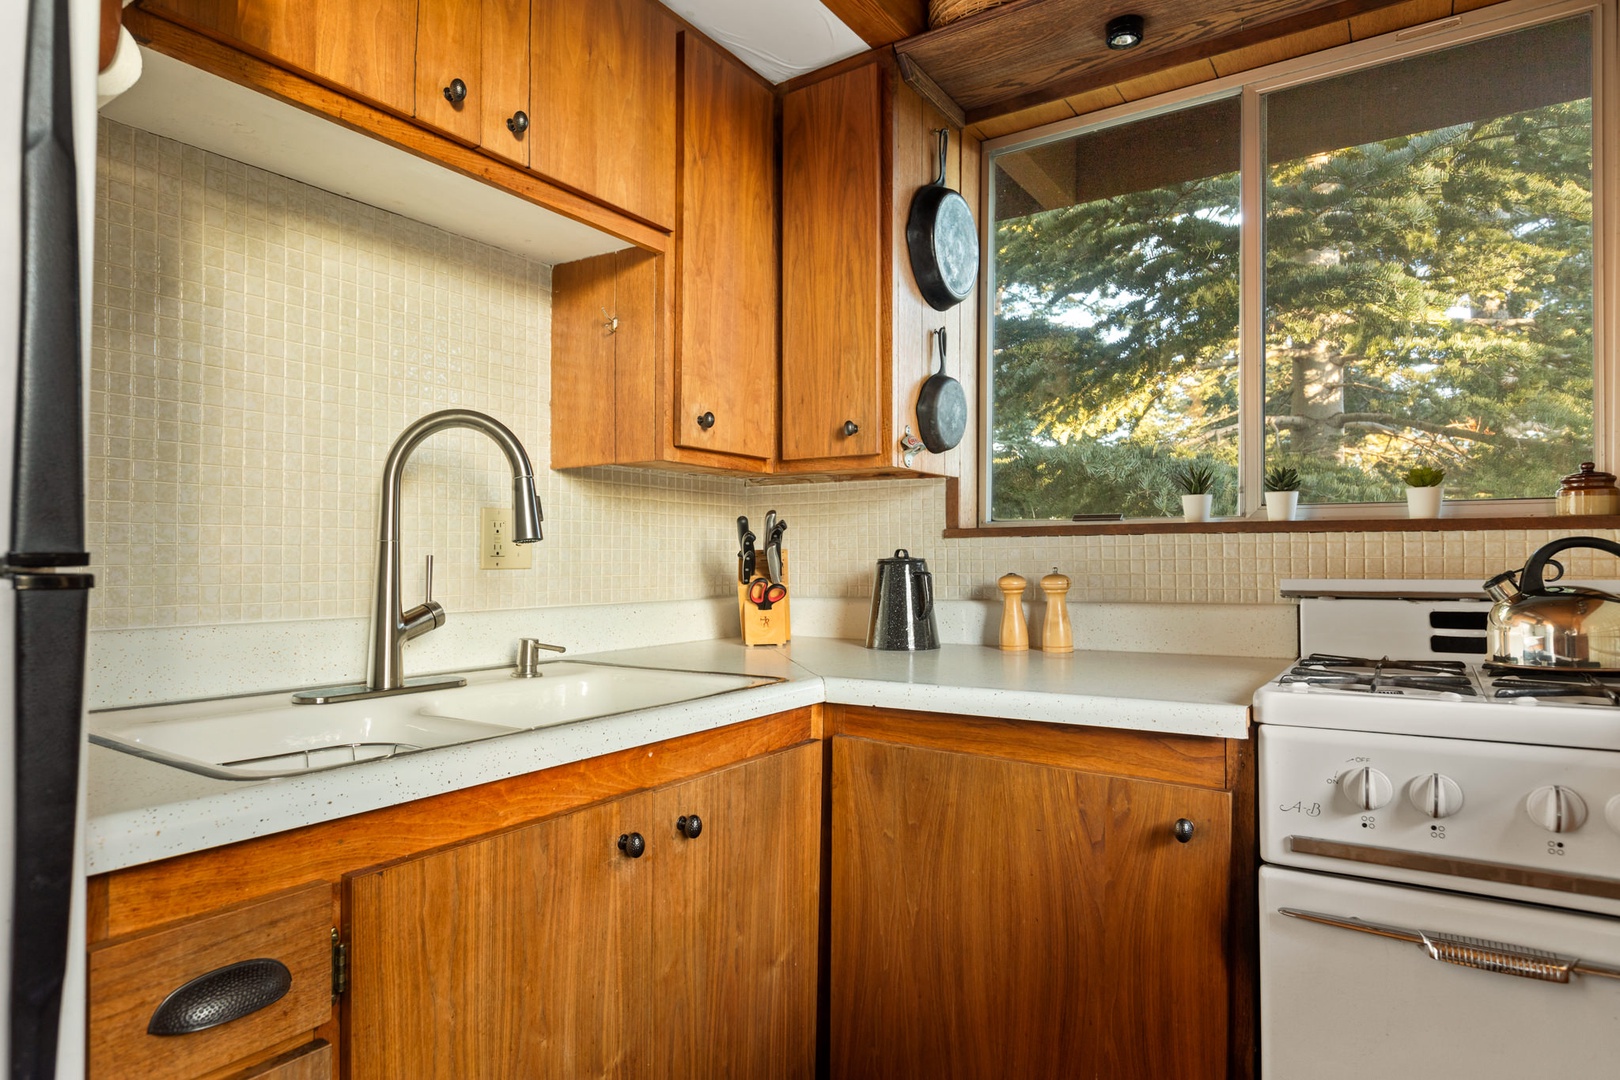 The cozy kitchen offers ample counter space & all the comforts of home